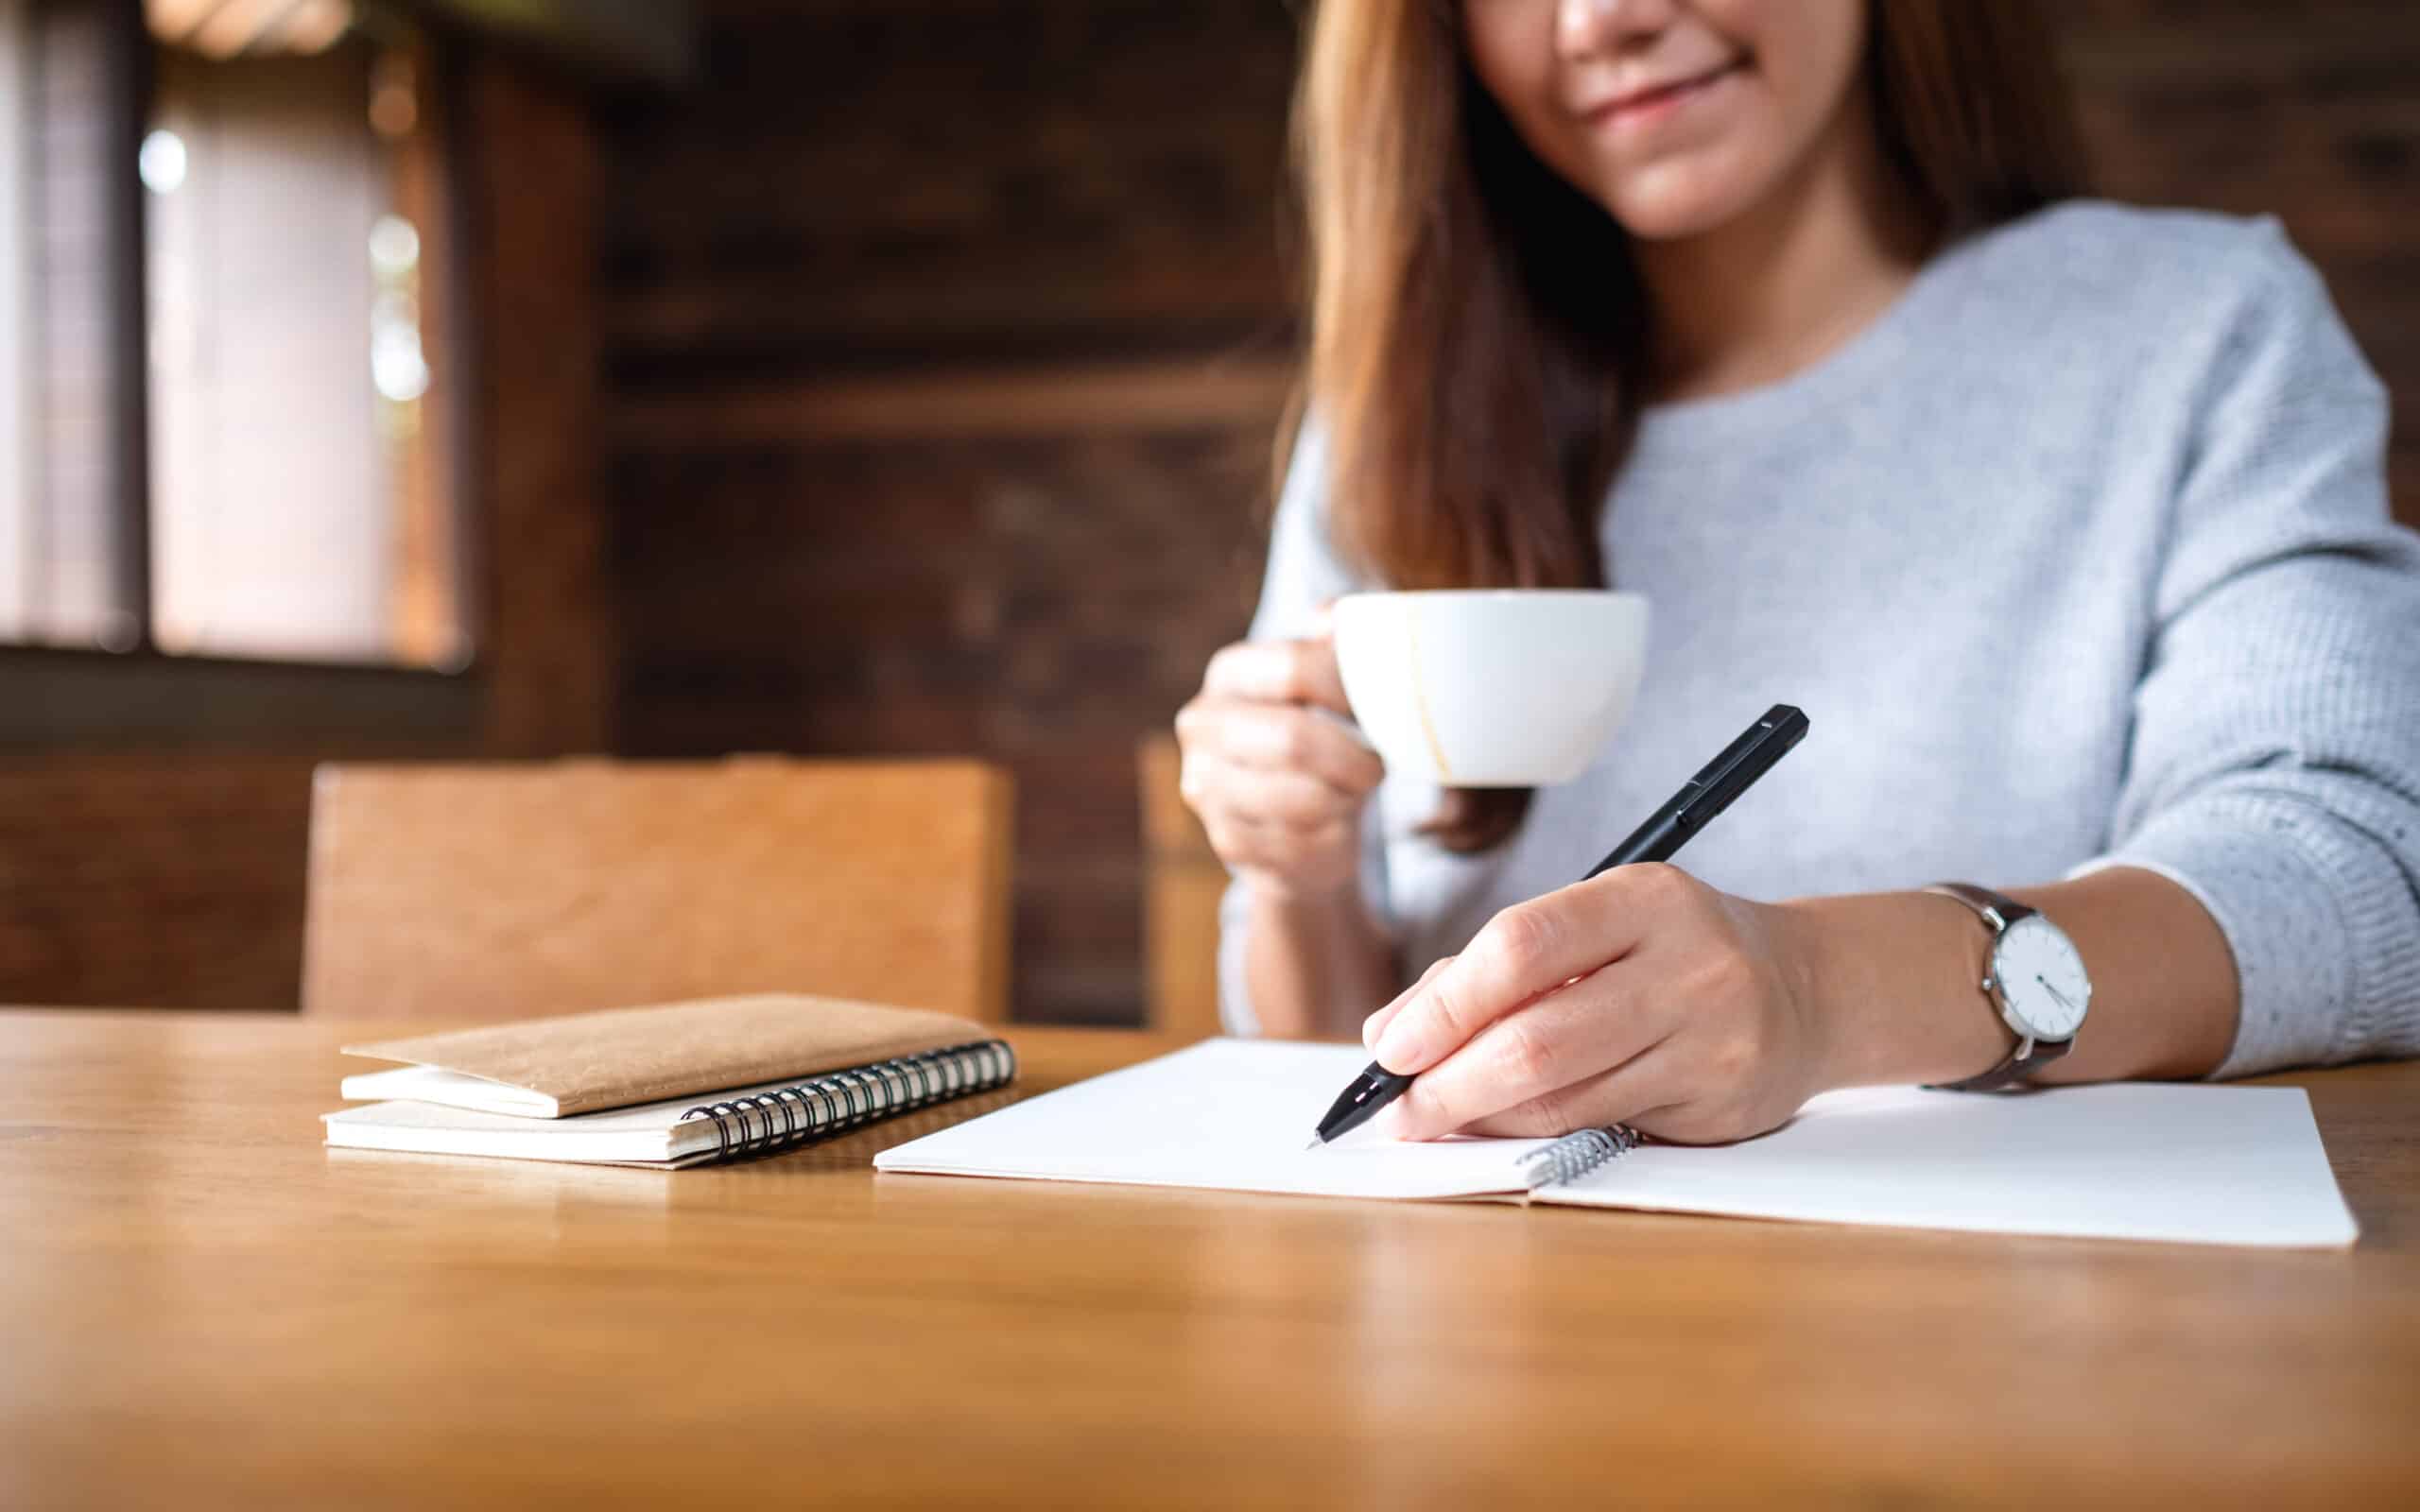 Asian woman drinking coffee and writing on a blank piece of paper.